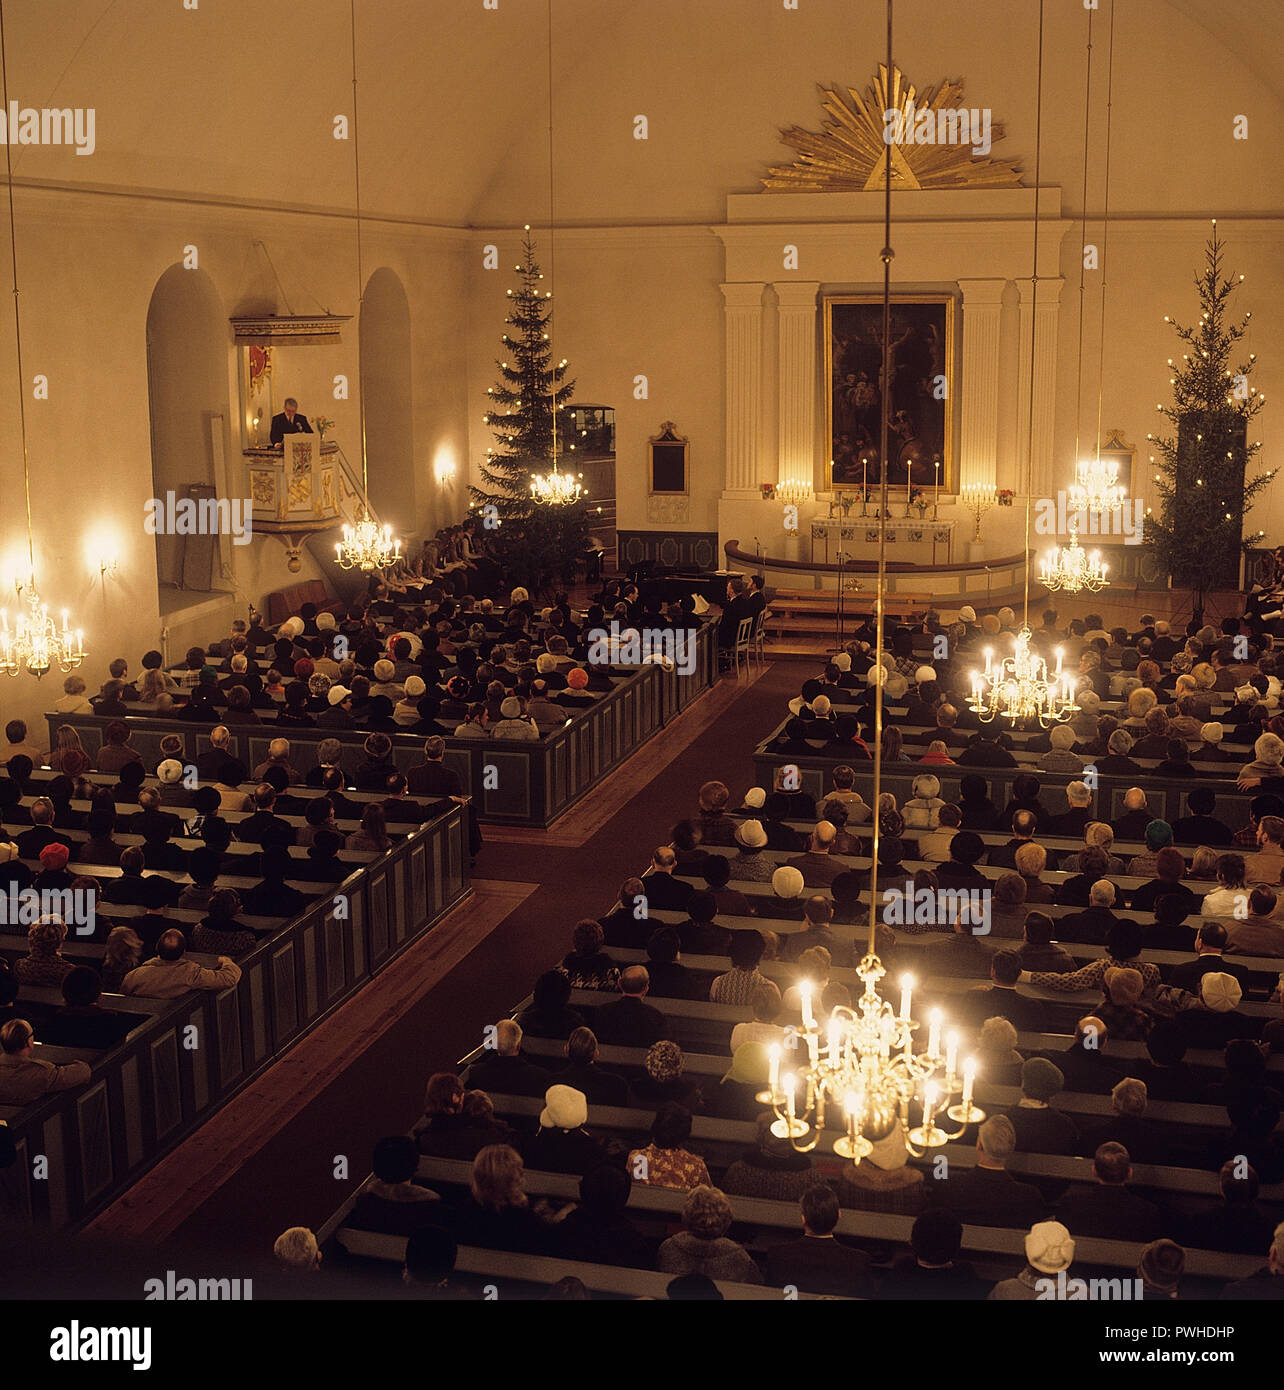 Early service on Christmas day. Interior from a church where people are sitting listening to the priest. The church is decorated with christmas trees. Sweden 1970s. Stock Photo